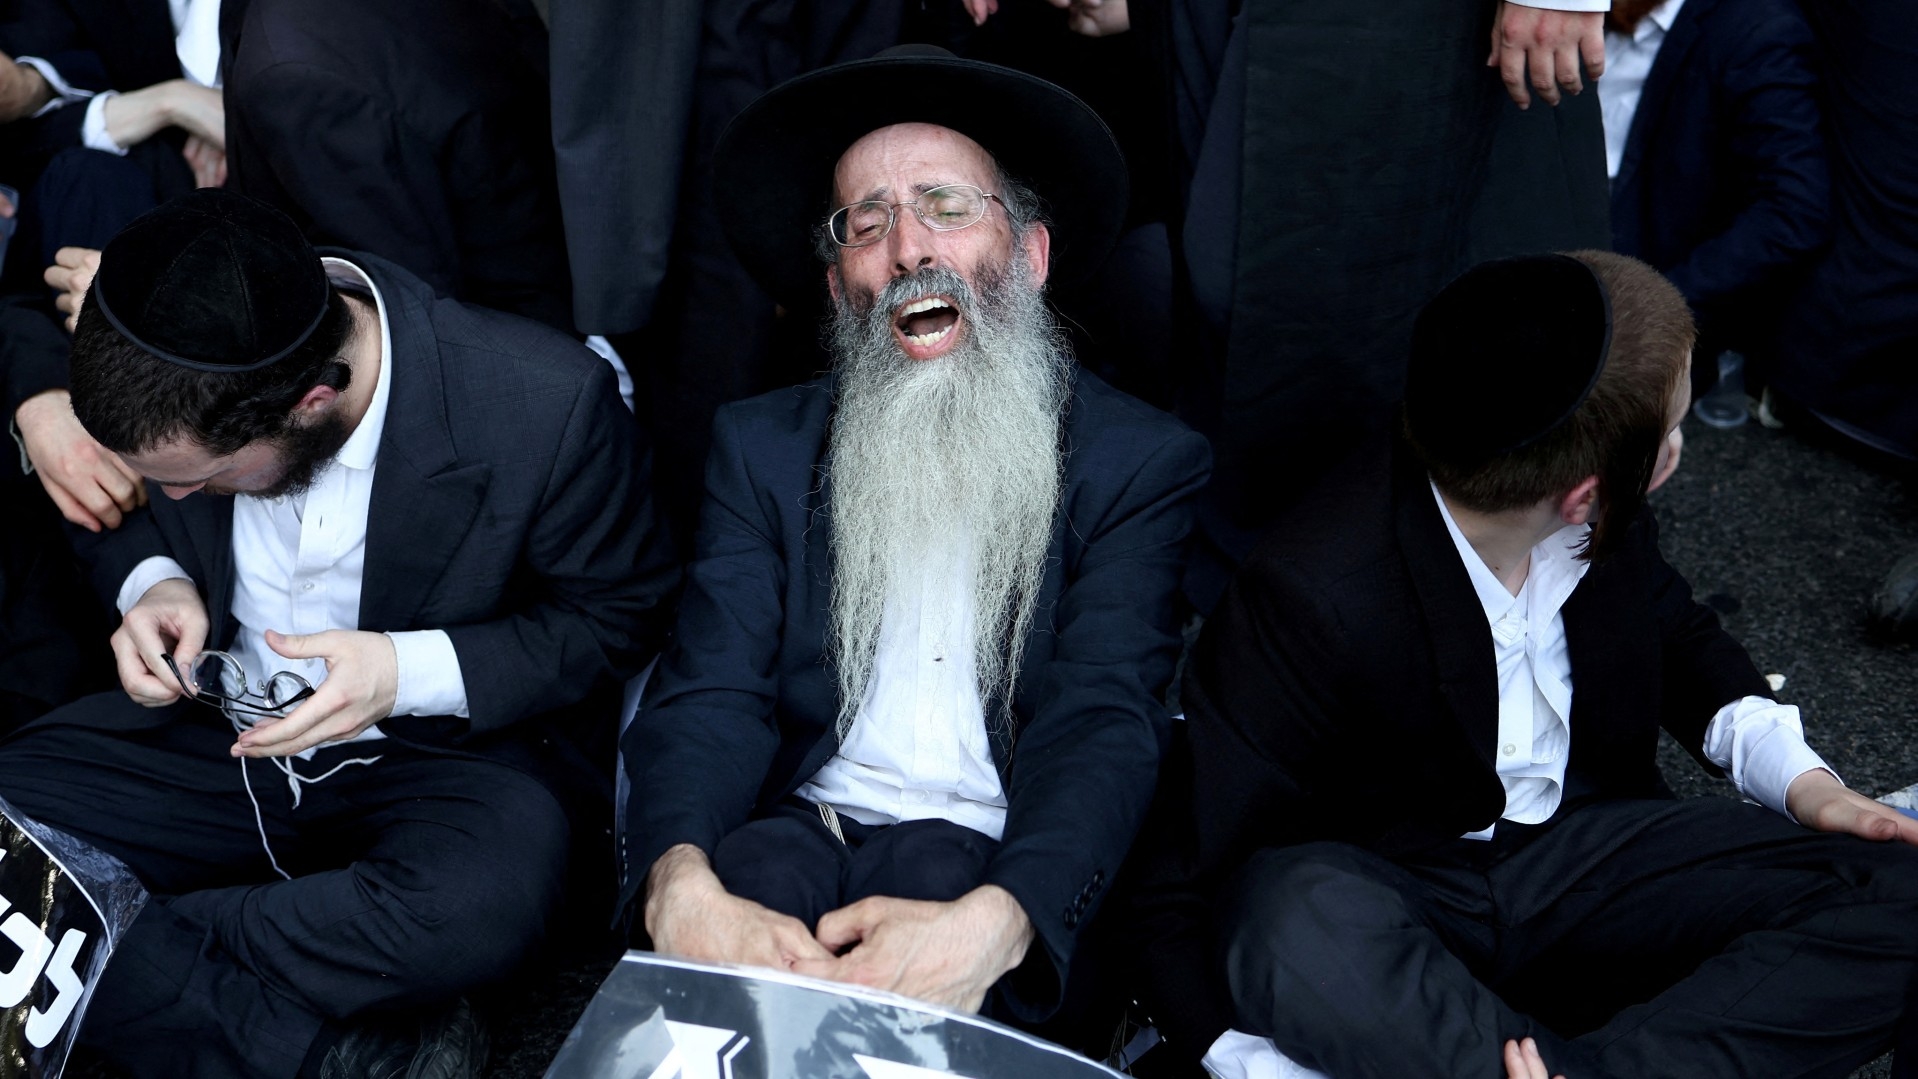 Ultra-Orthodox men protest in Bnei Brak, Israel, on 27 June following a ruling requiring the state to begin drafting seminary students into the military (Reuters/Eloisa Lopez)